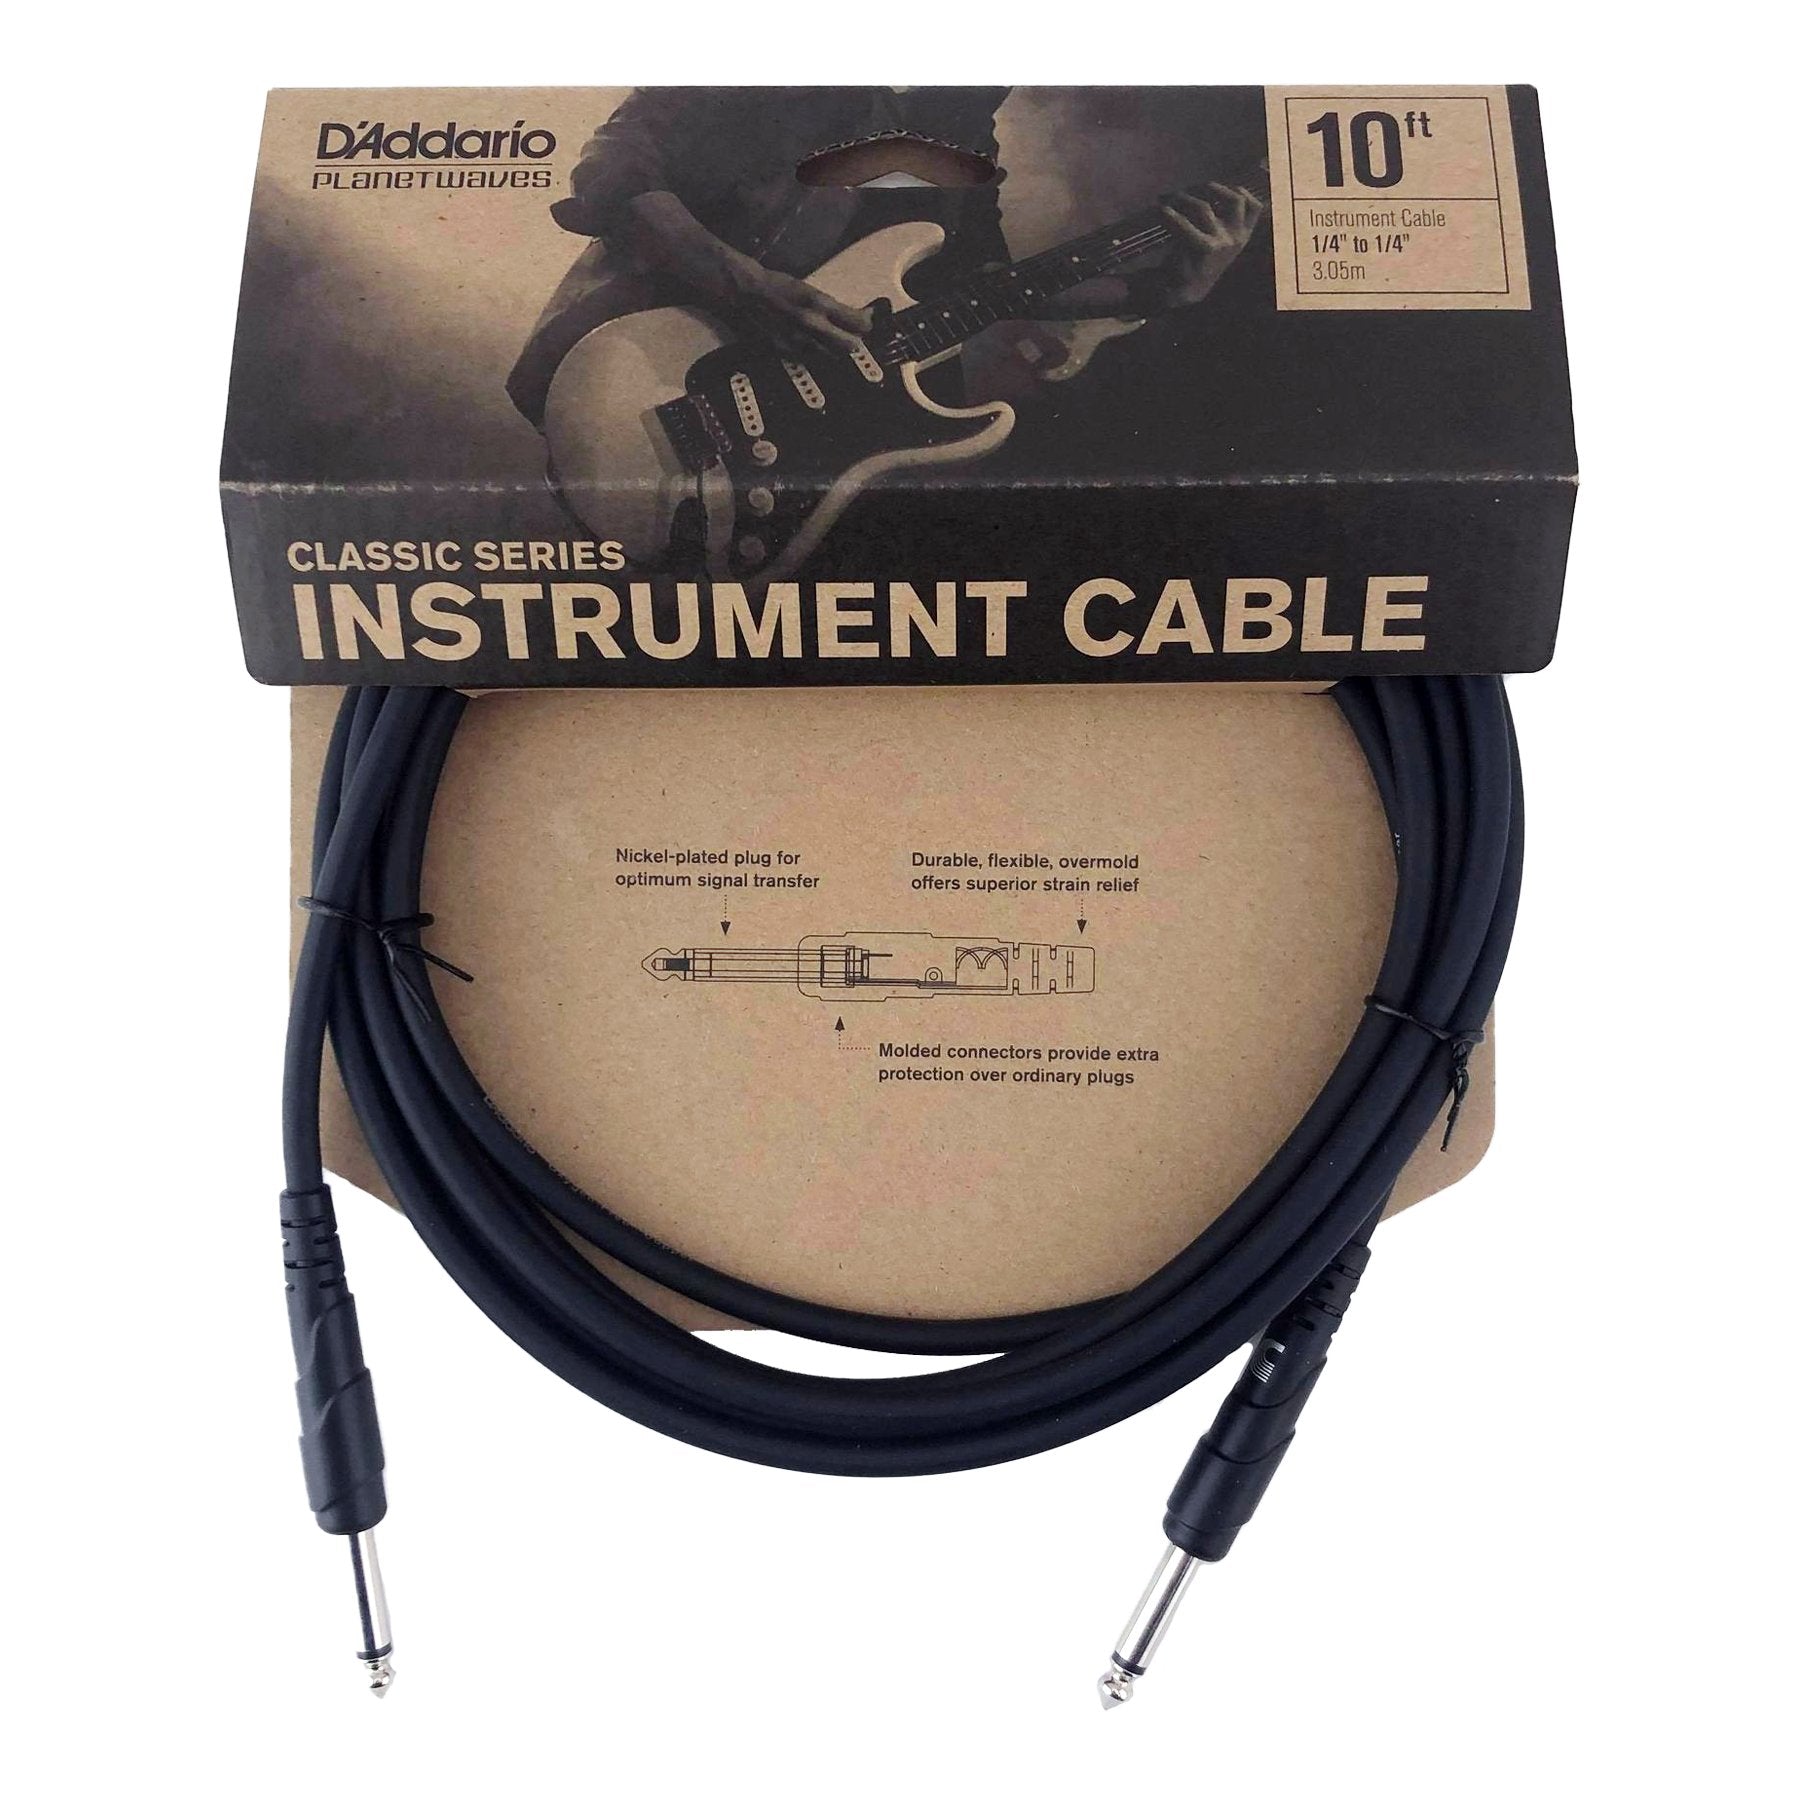 Planet Waves 'Classic Series' 1/4" Straight Jack Instrument Cable (10ft)-PW-CGT-10